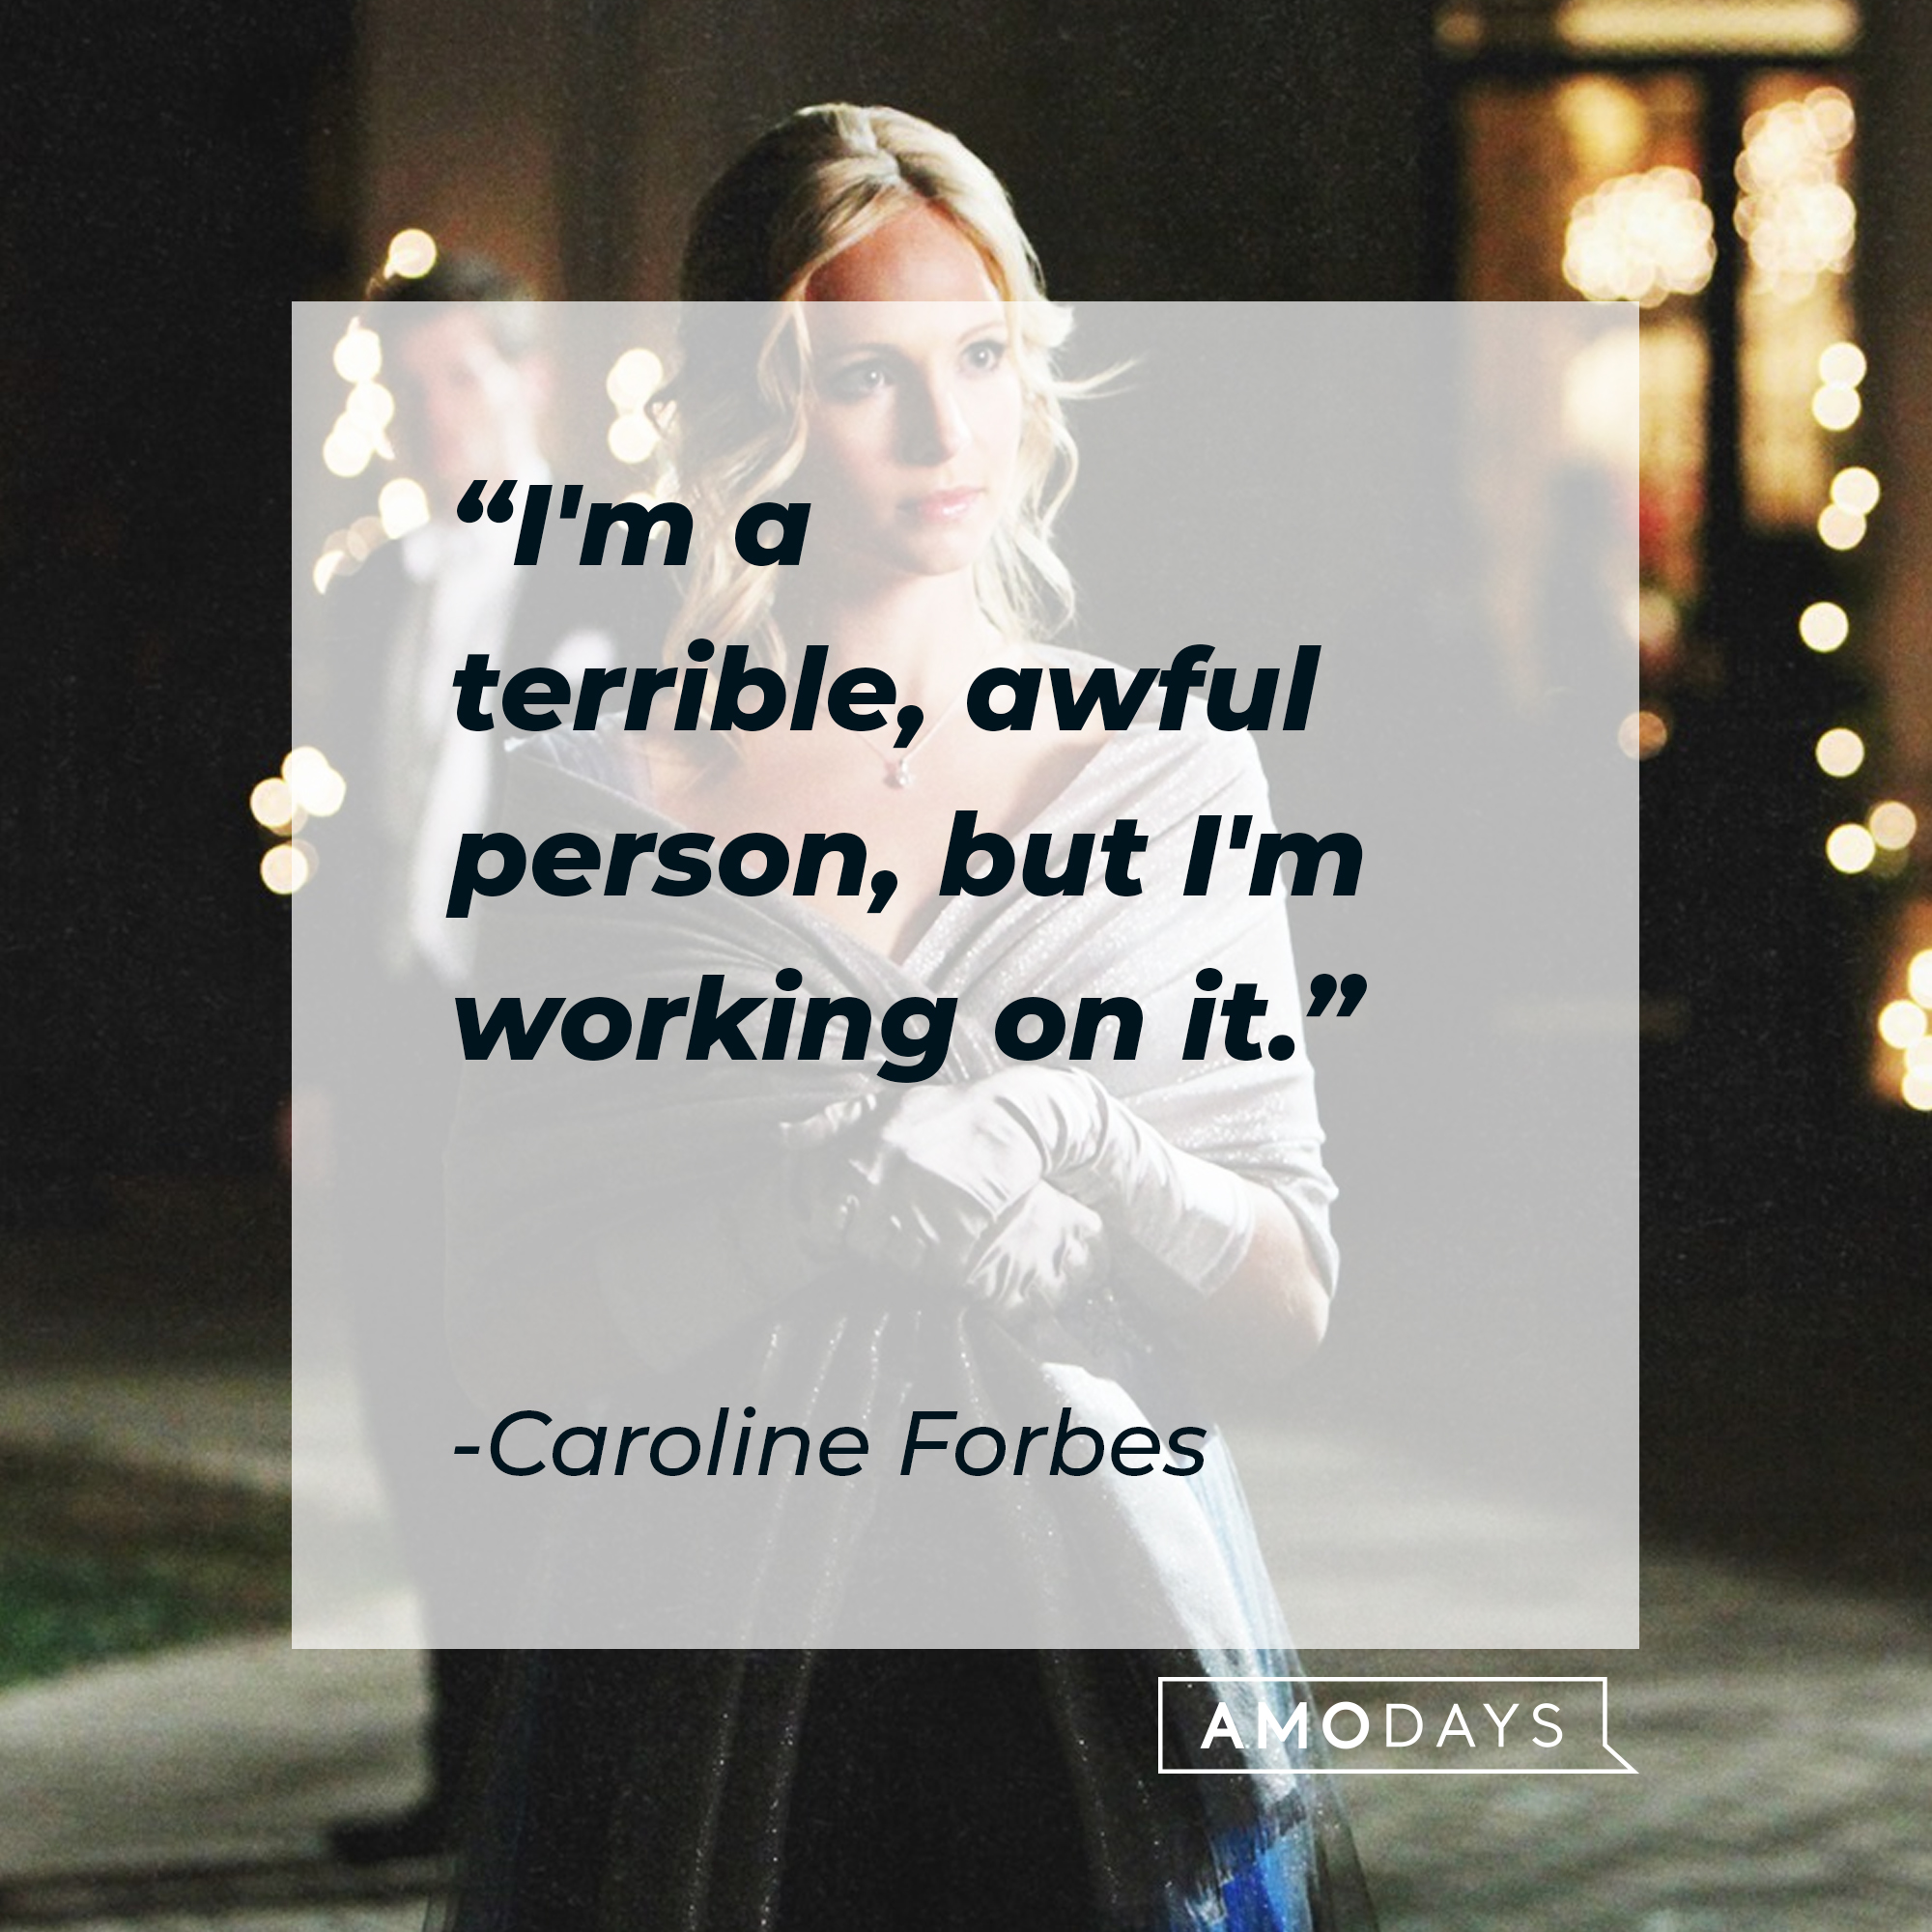 Caroline Forbes' quote: "I'm a terrible, awful person, but I'm working on it." | Source: Facebook.com/thevampirediaries